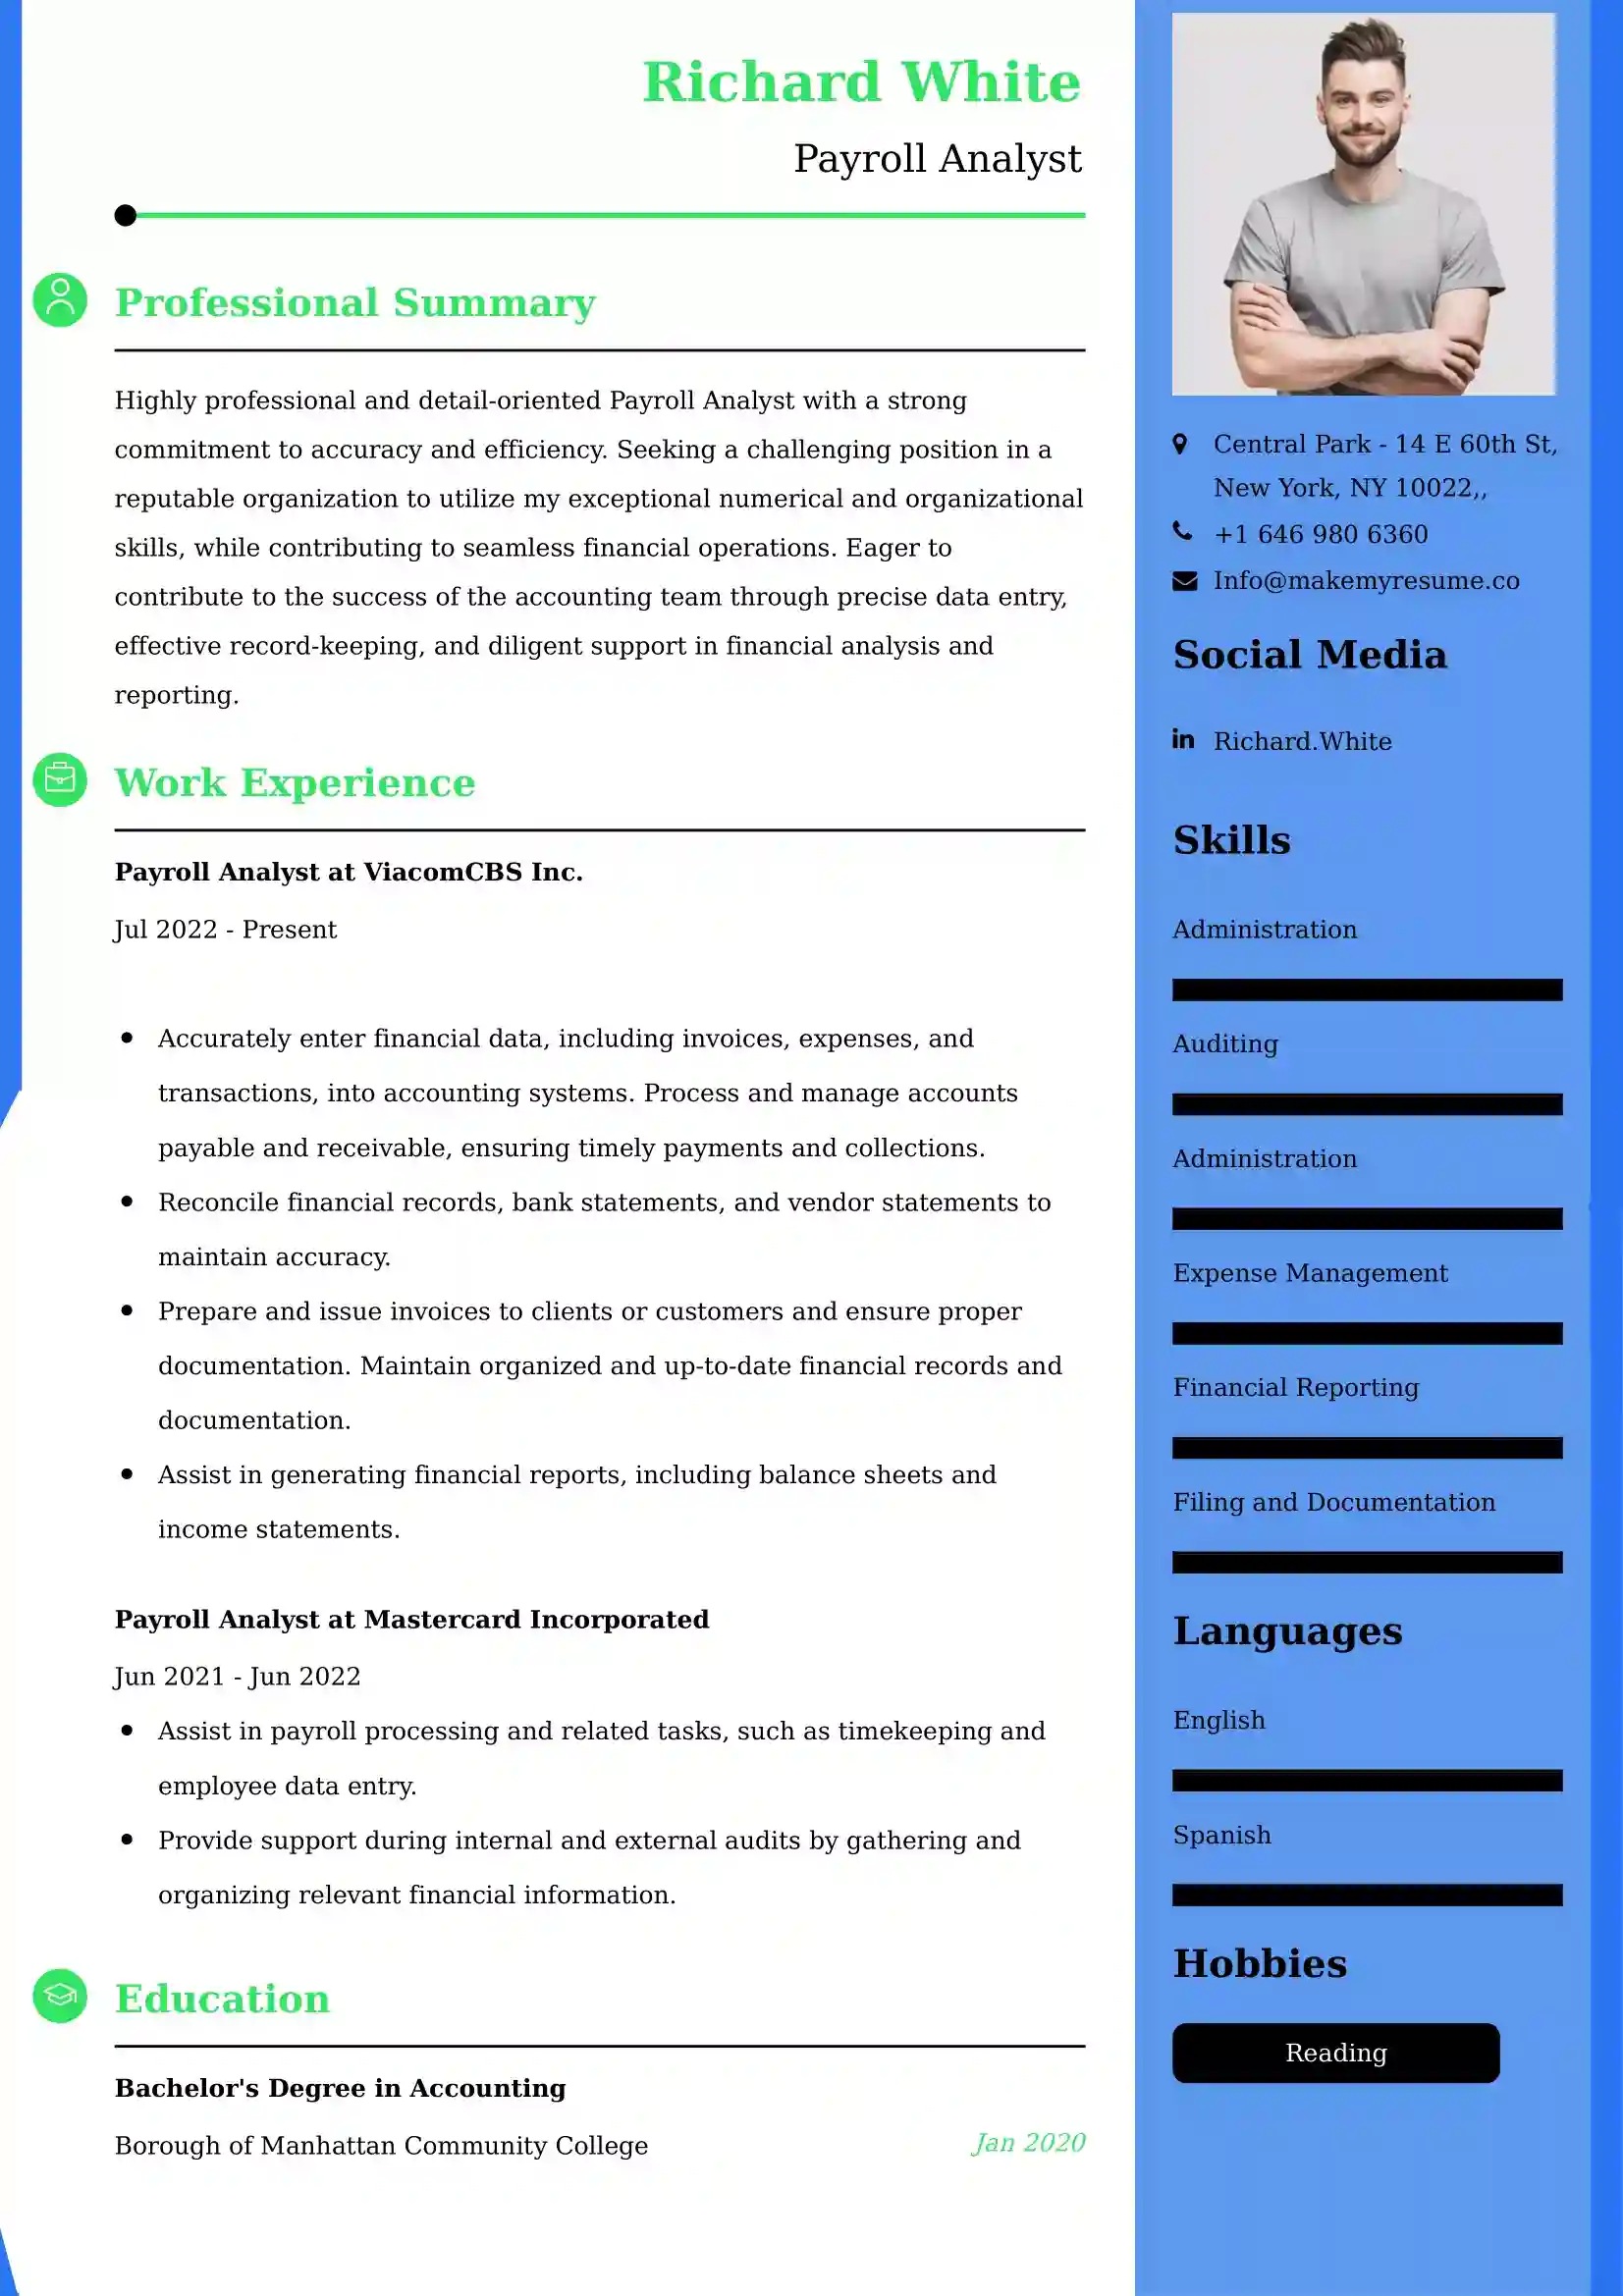 Payroll Analyst Resume Examples India